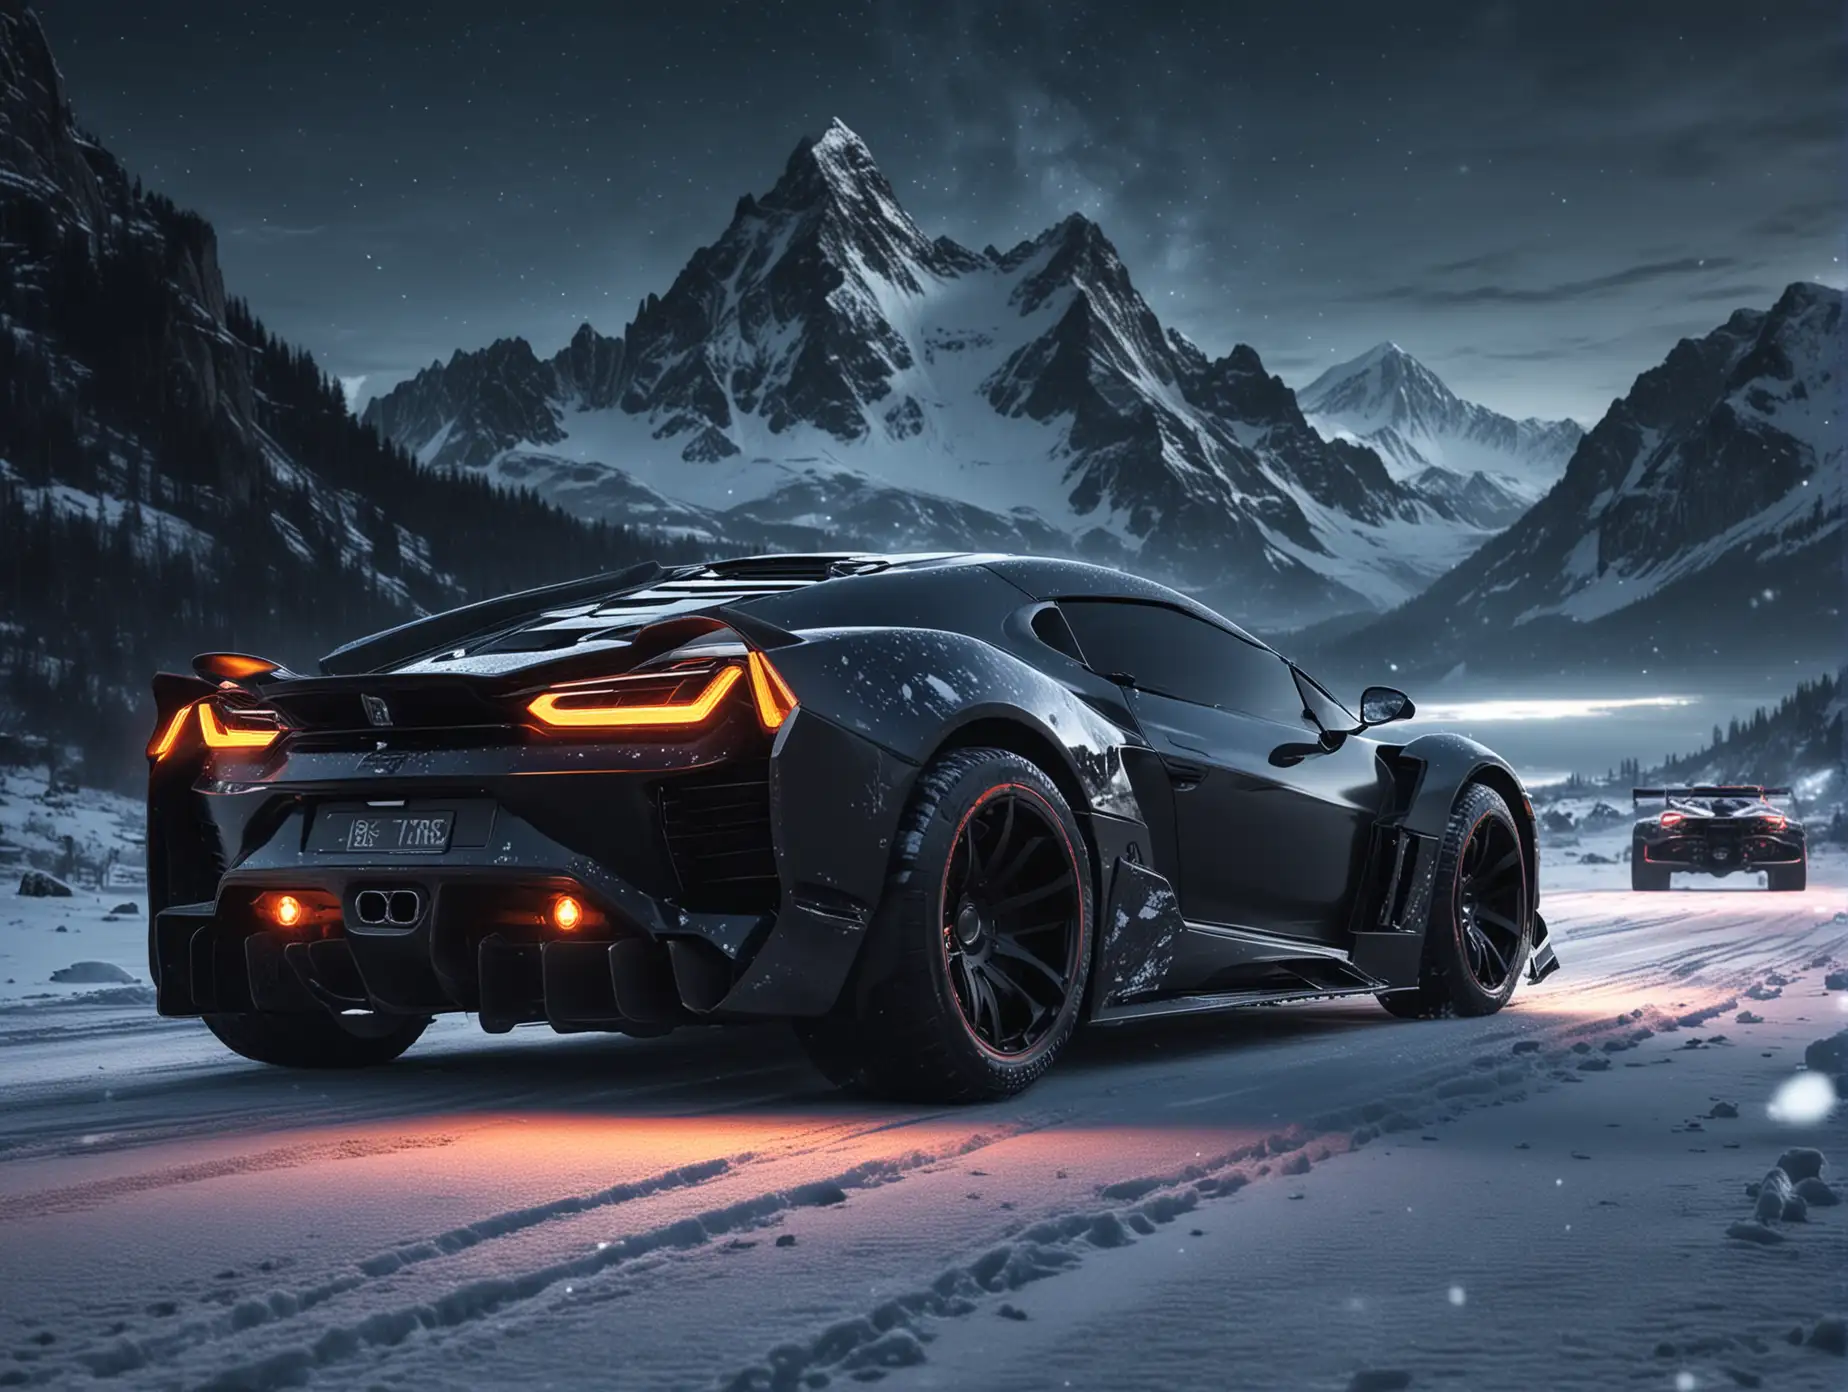 Create futuristic concept sport cars from 2500 years mix tuning type monsters driving at night on bright with mountains in background black color snow